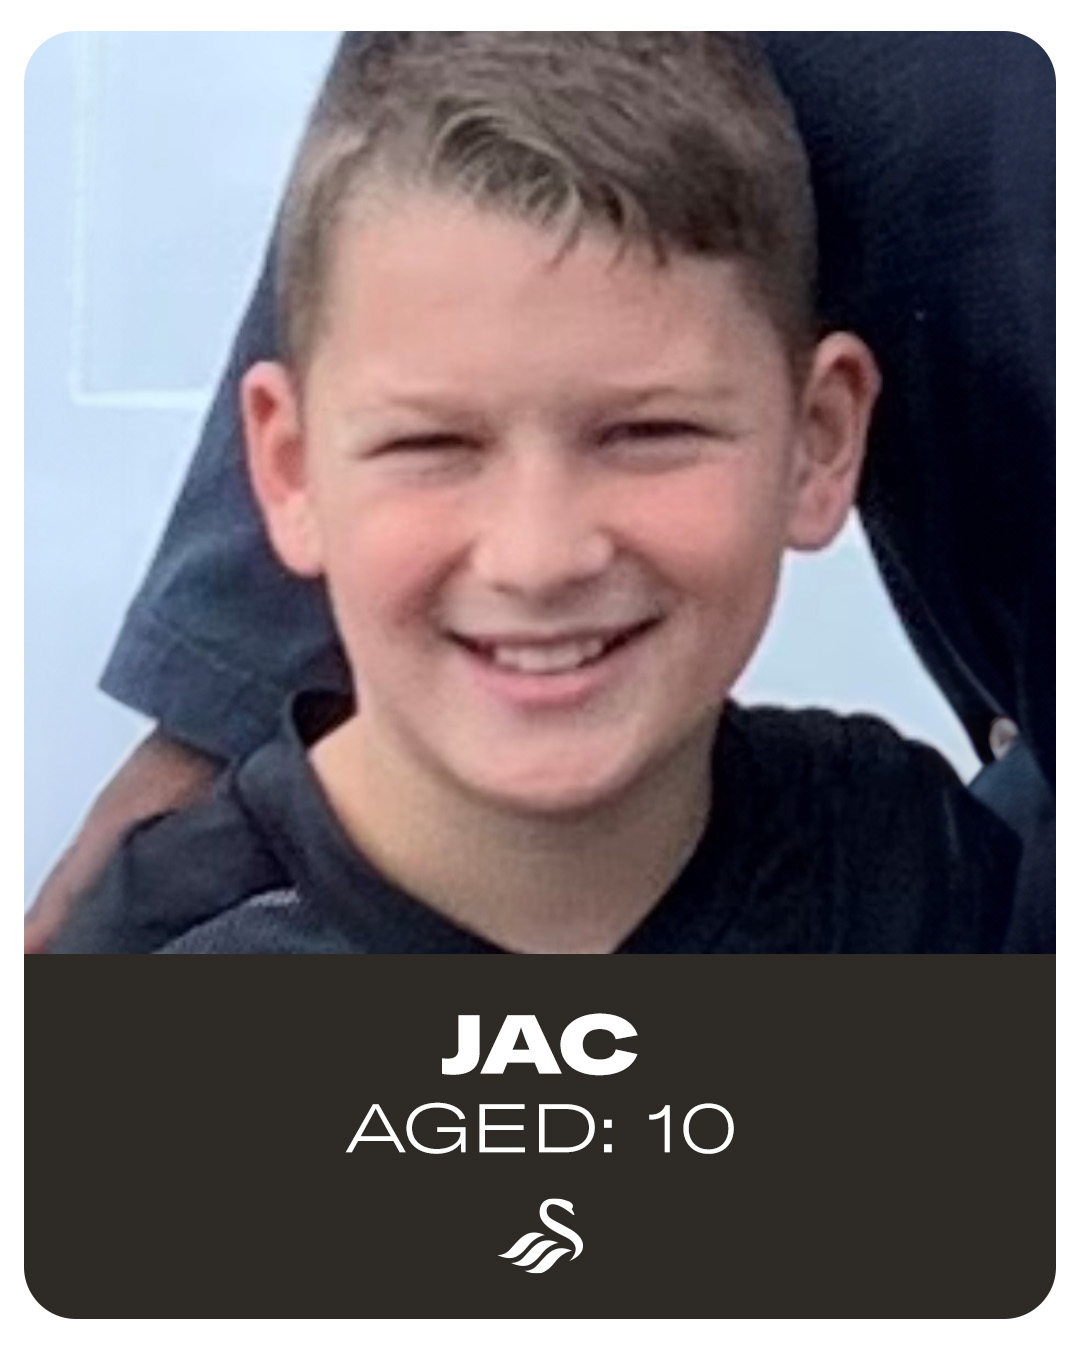 Photograph of Jac, aged 10